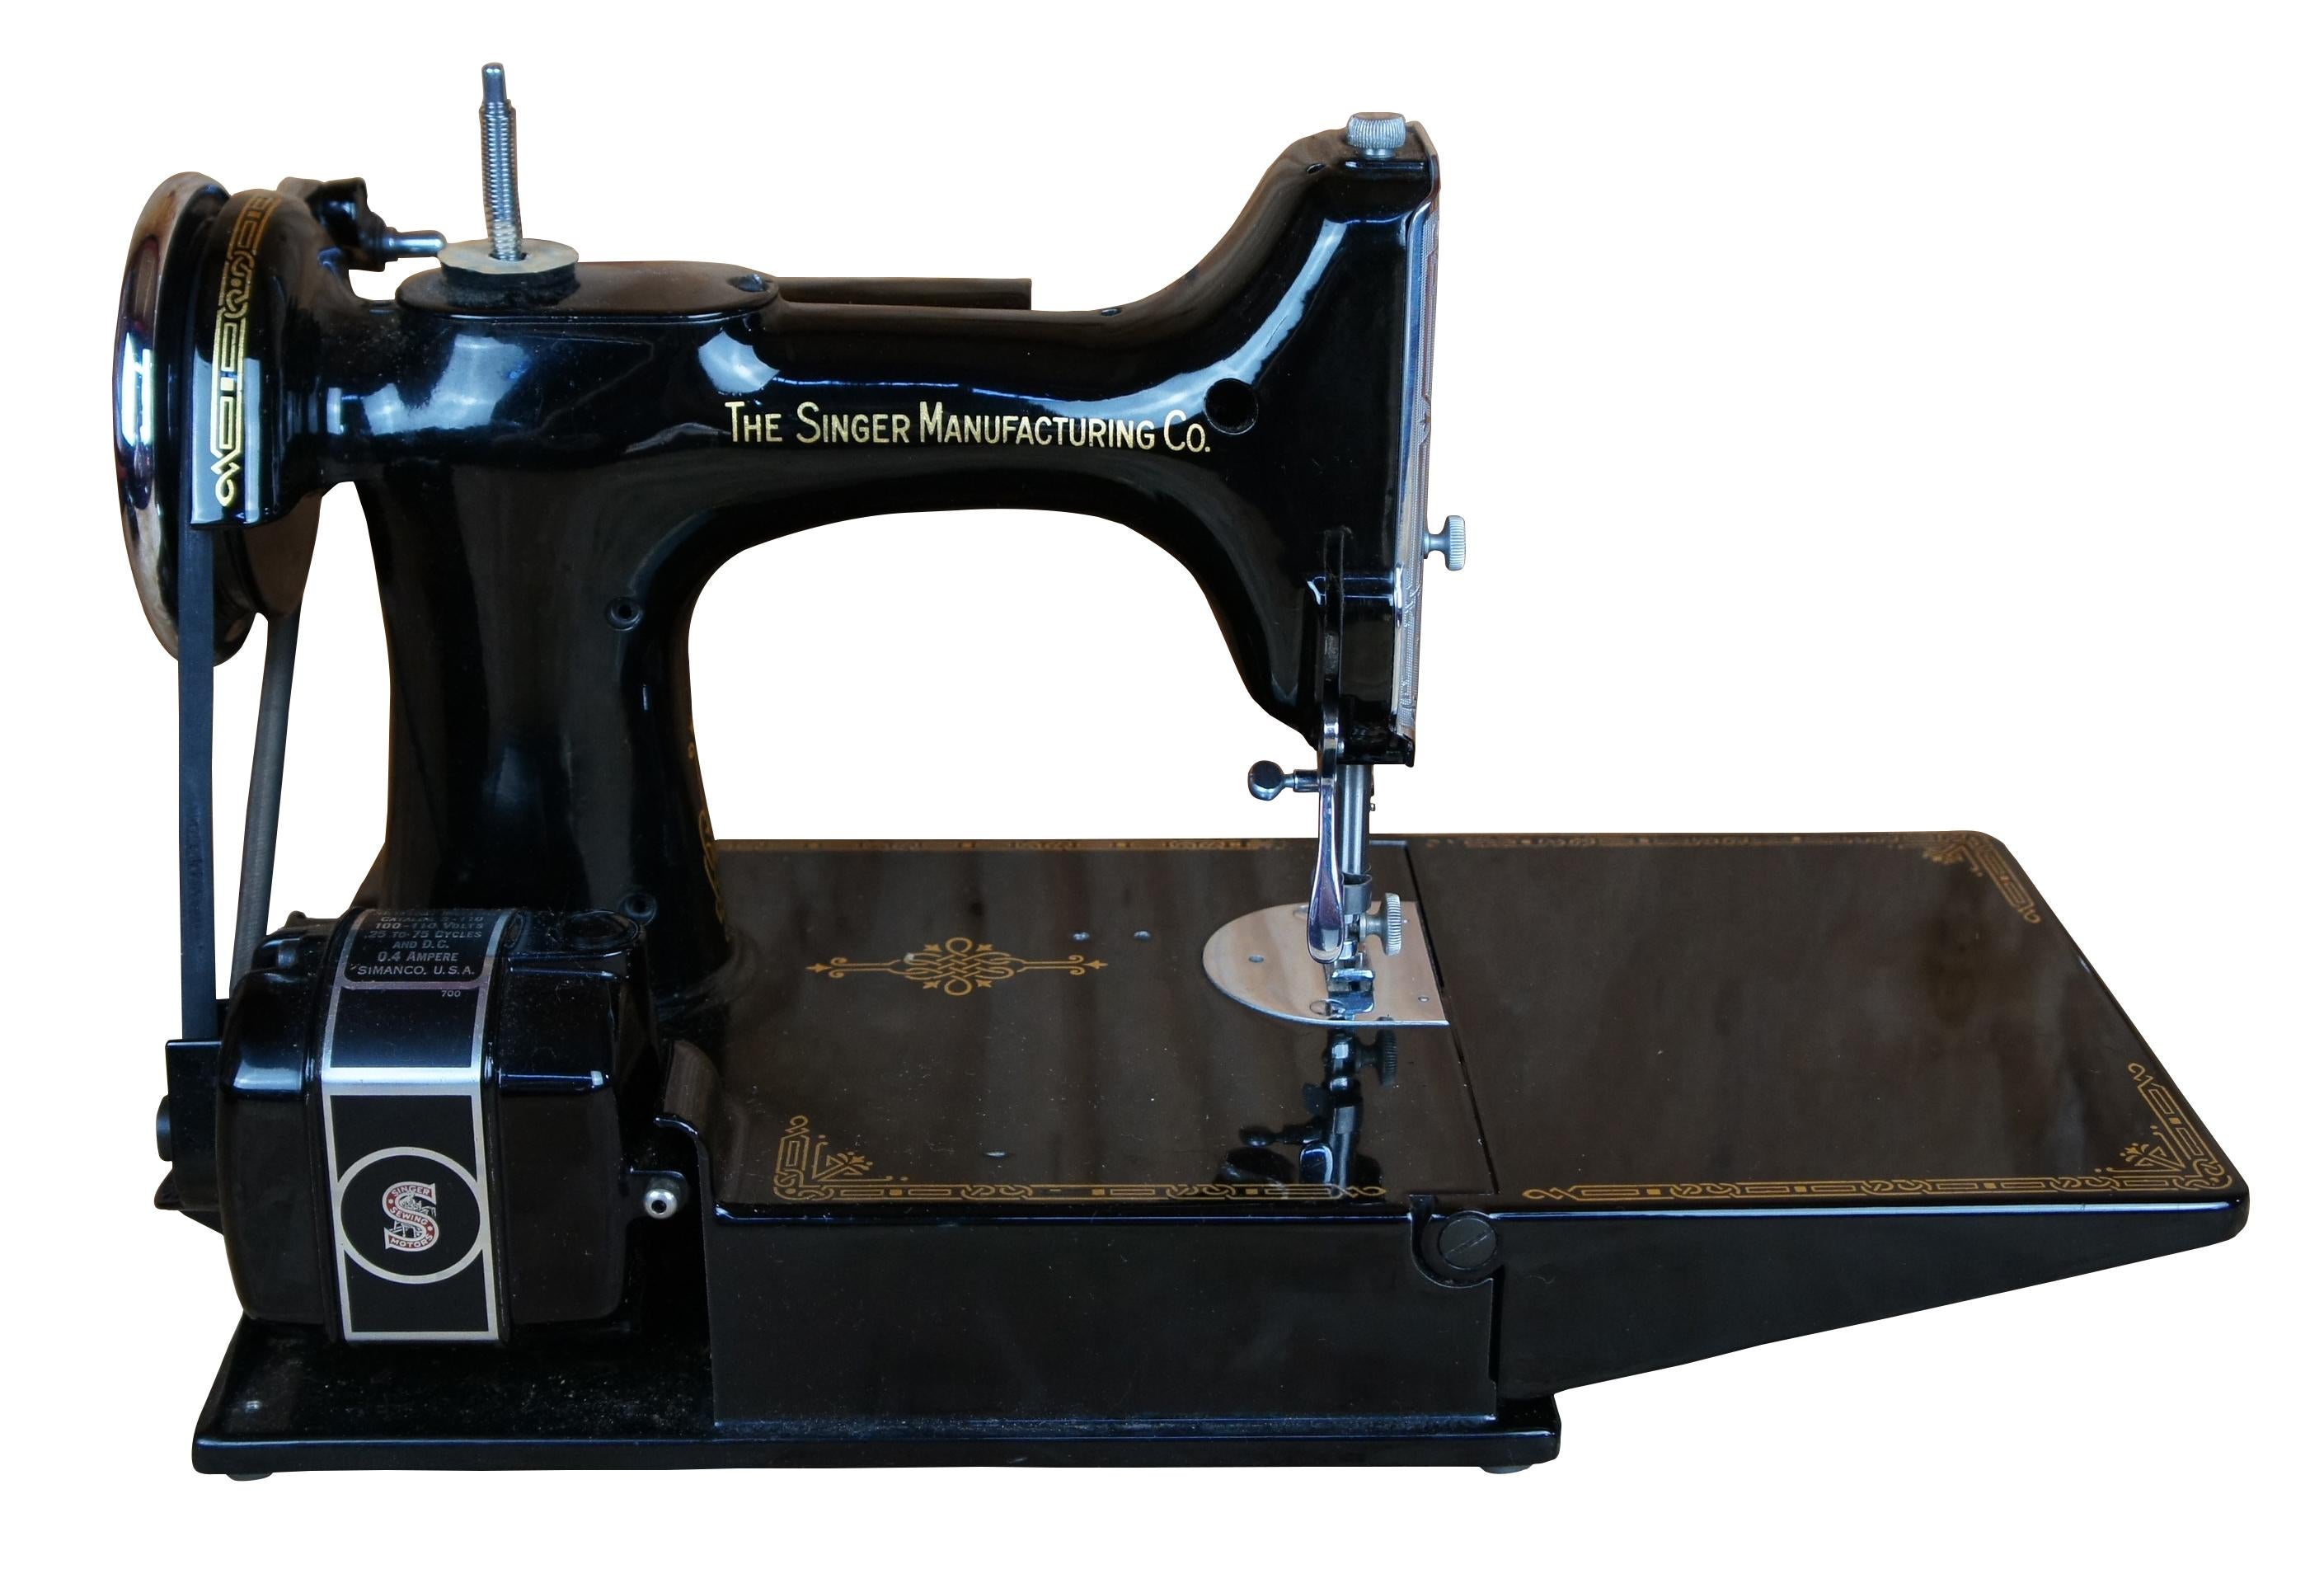 Singer Featherweight 221 portable sewing machine comes with original carrying case, manual and many extras including thread, bobbins, and additional feet.

Made in January of 1941
Serial number - AF750602

Case- 13” x 8.25” x 11.75”H, machine- 15.5”